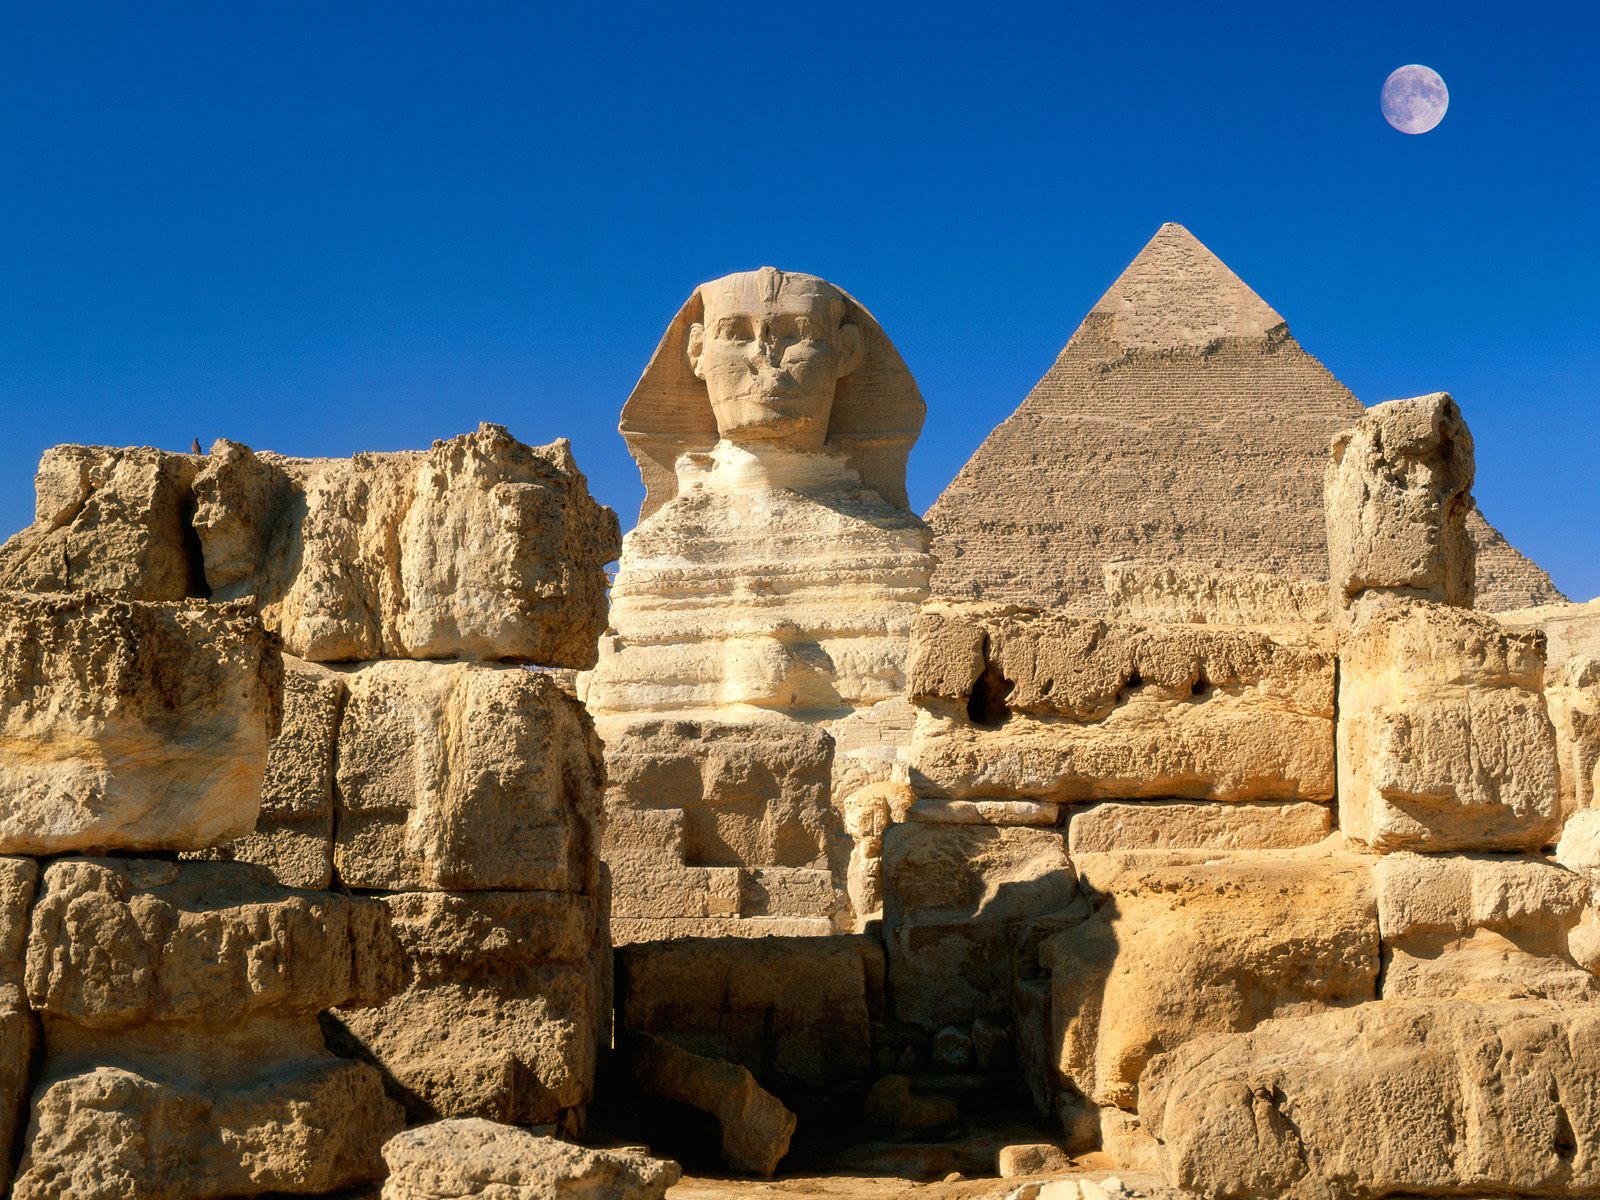 The Biggest Secrets Of The World: Mere Monuments or Ancient Enigmas? - Great Sphinx Chephren PyramiD Giza Egypt